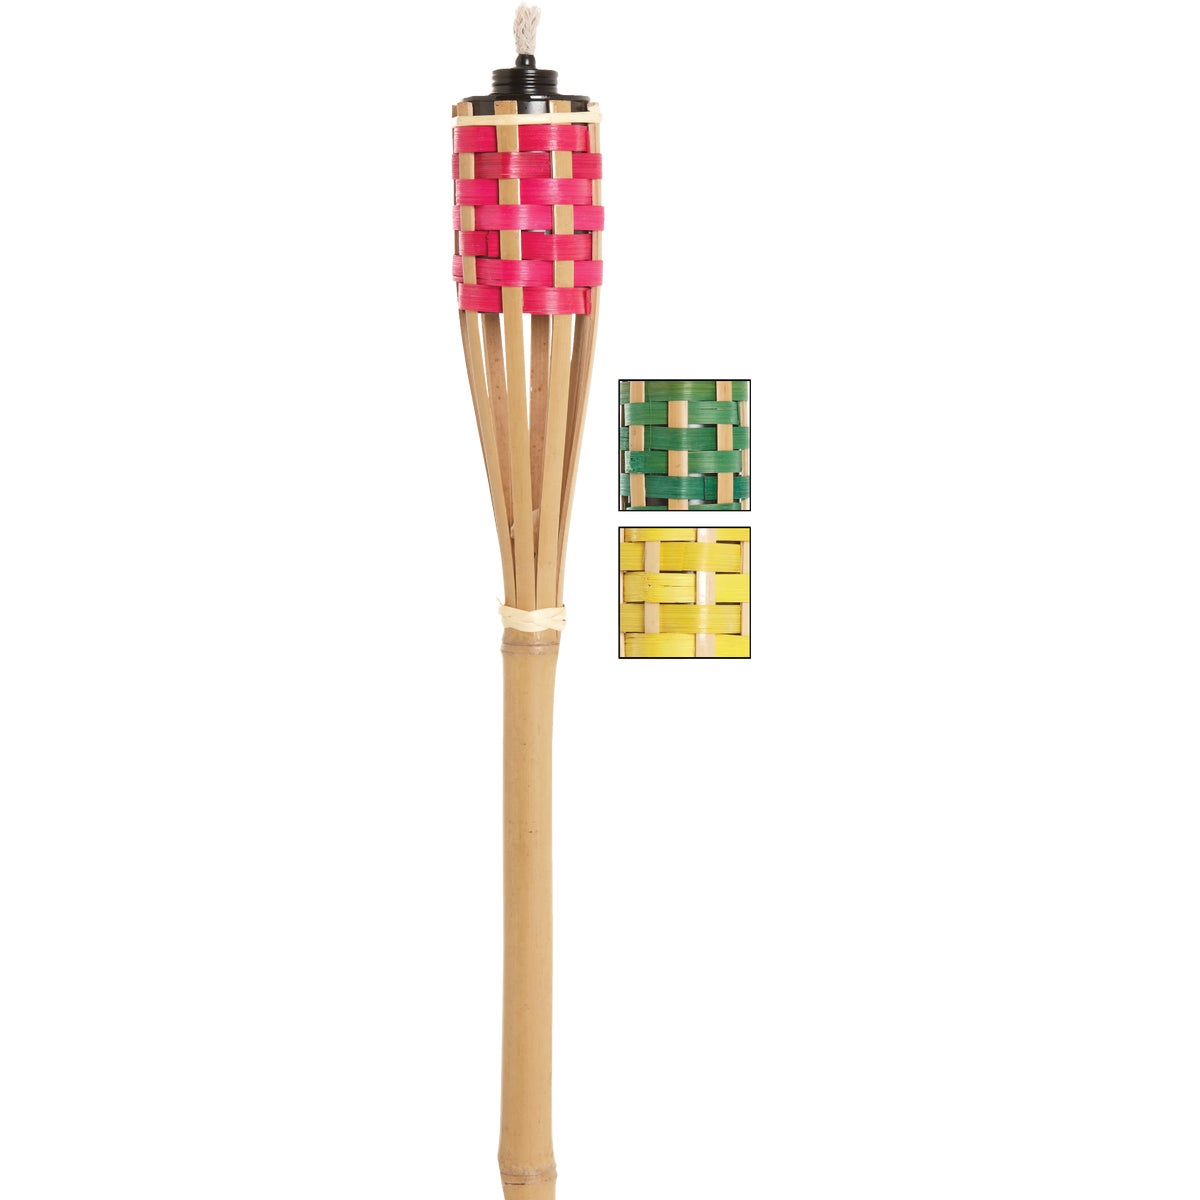 Item 753586, Durable bamboo patio torch.